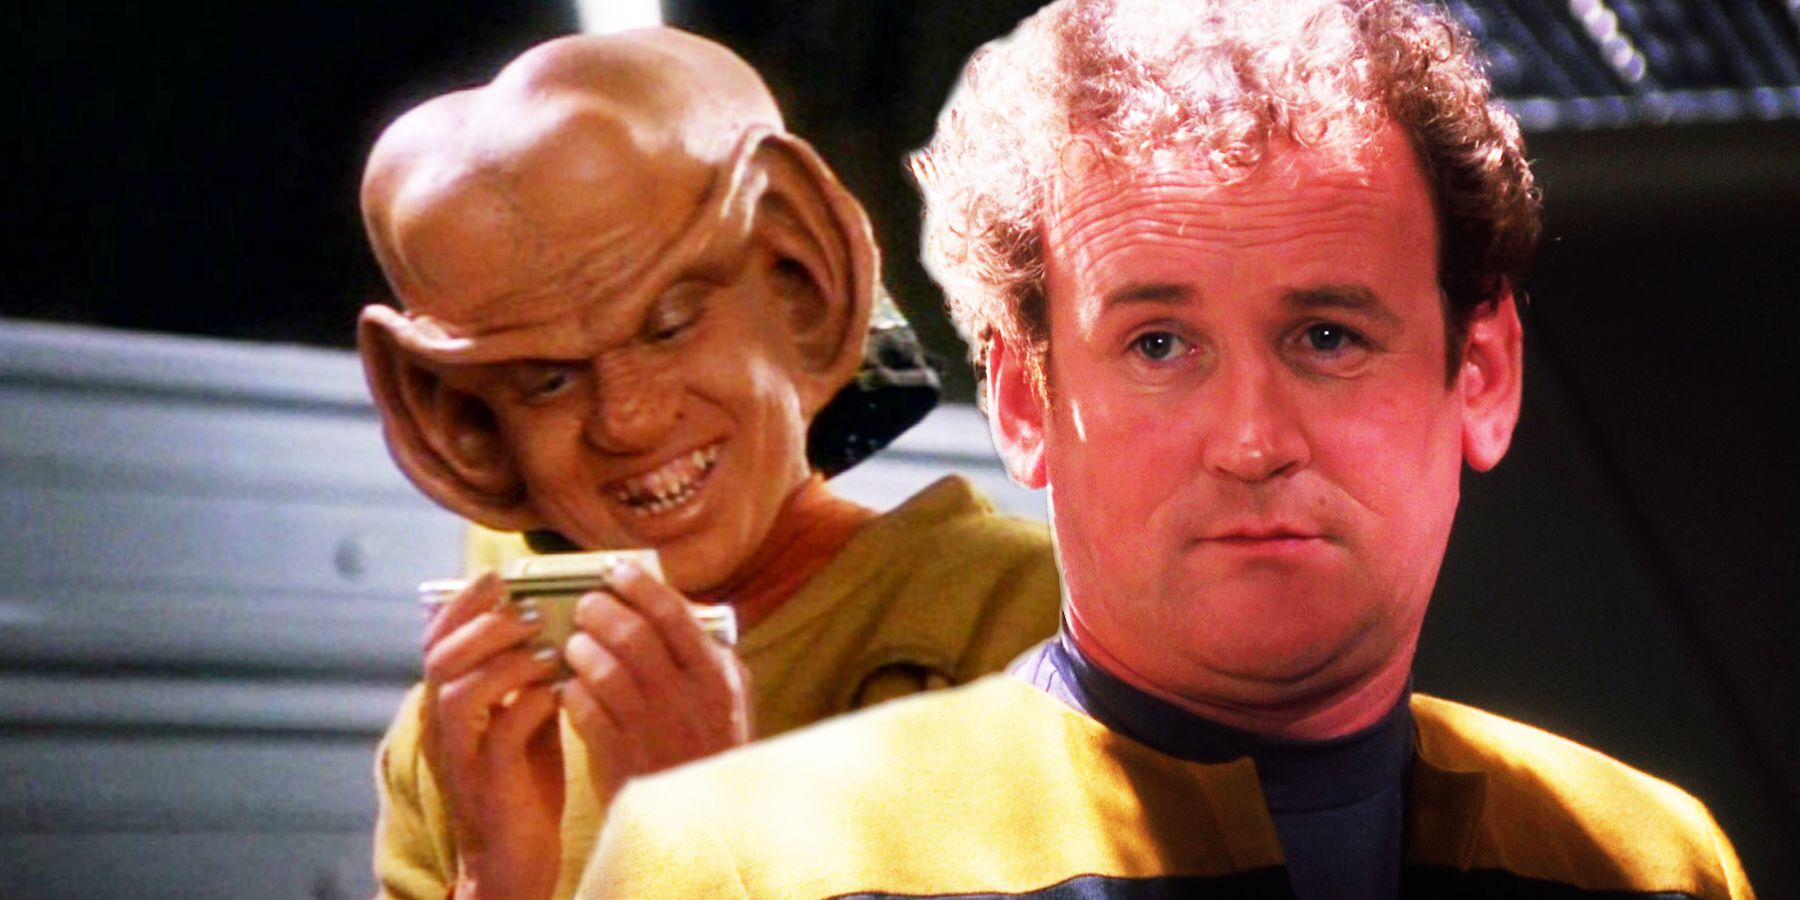 Nog holds a self-sealing stem bolt while Chief O'Brien looks skeptical